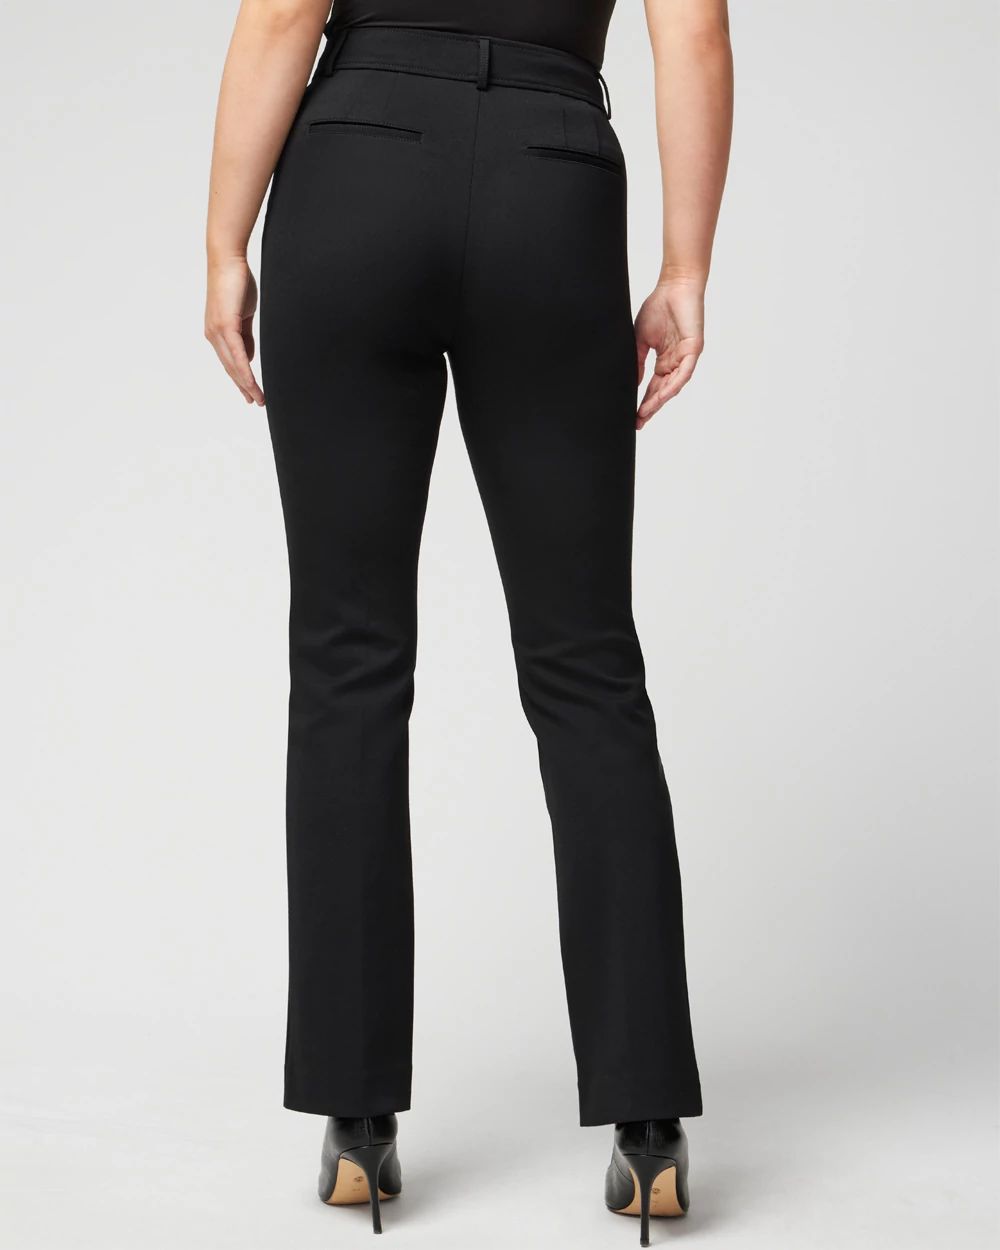 Curvy Extra High-Rise Luxe Stretch Bootcut Pants click to view larger image.